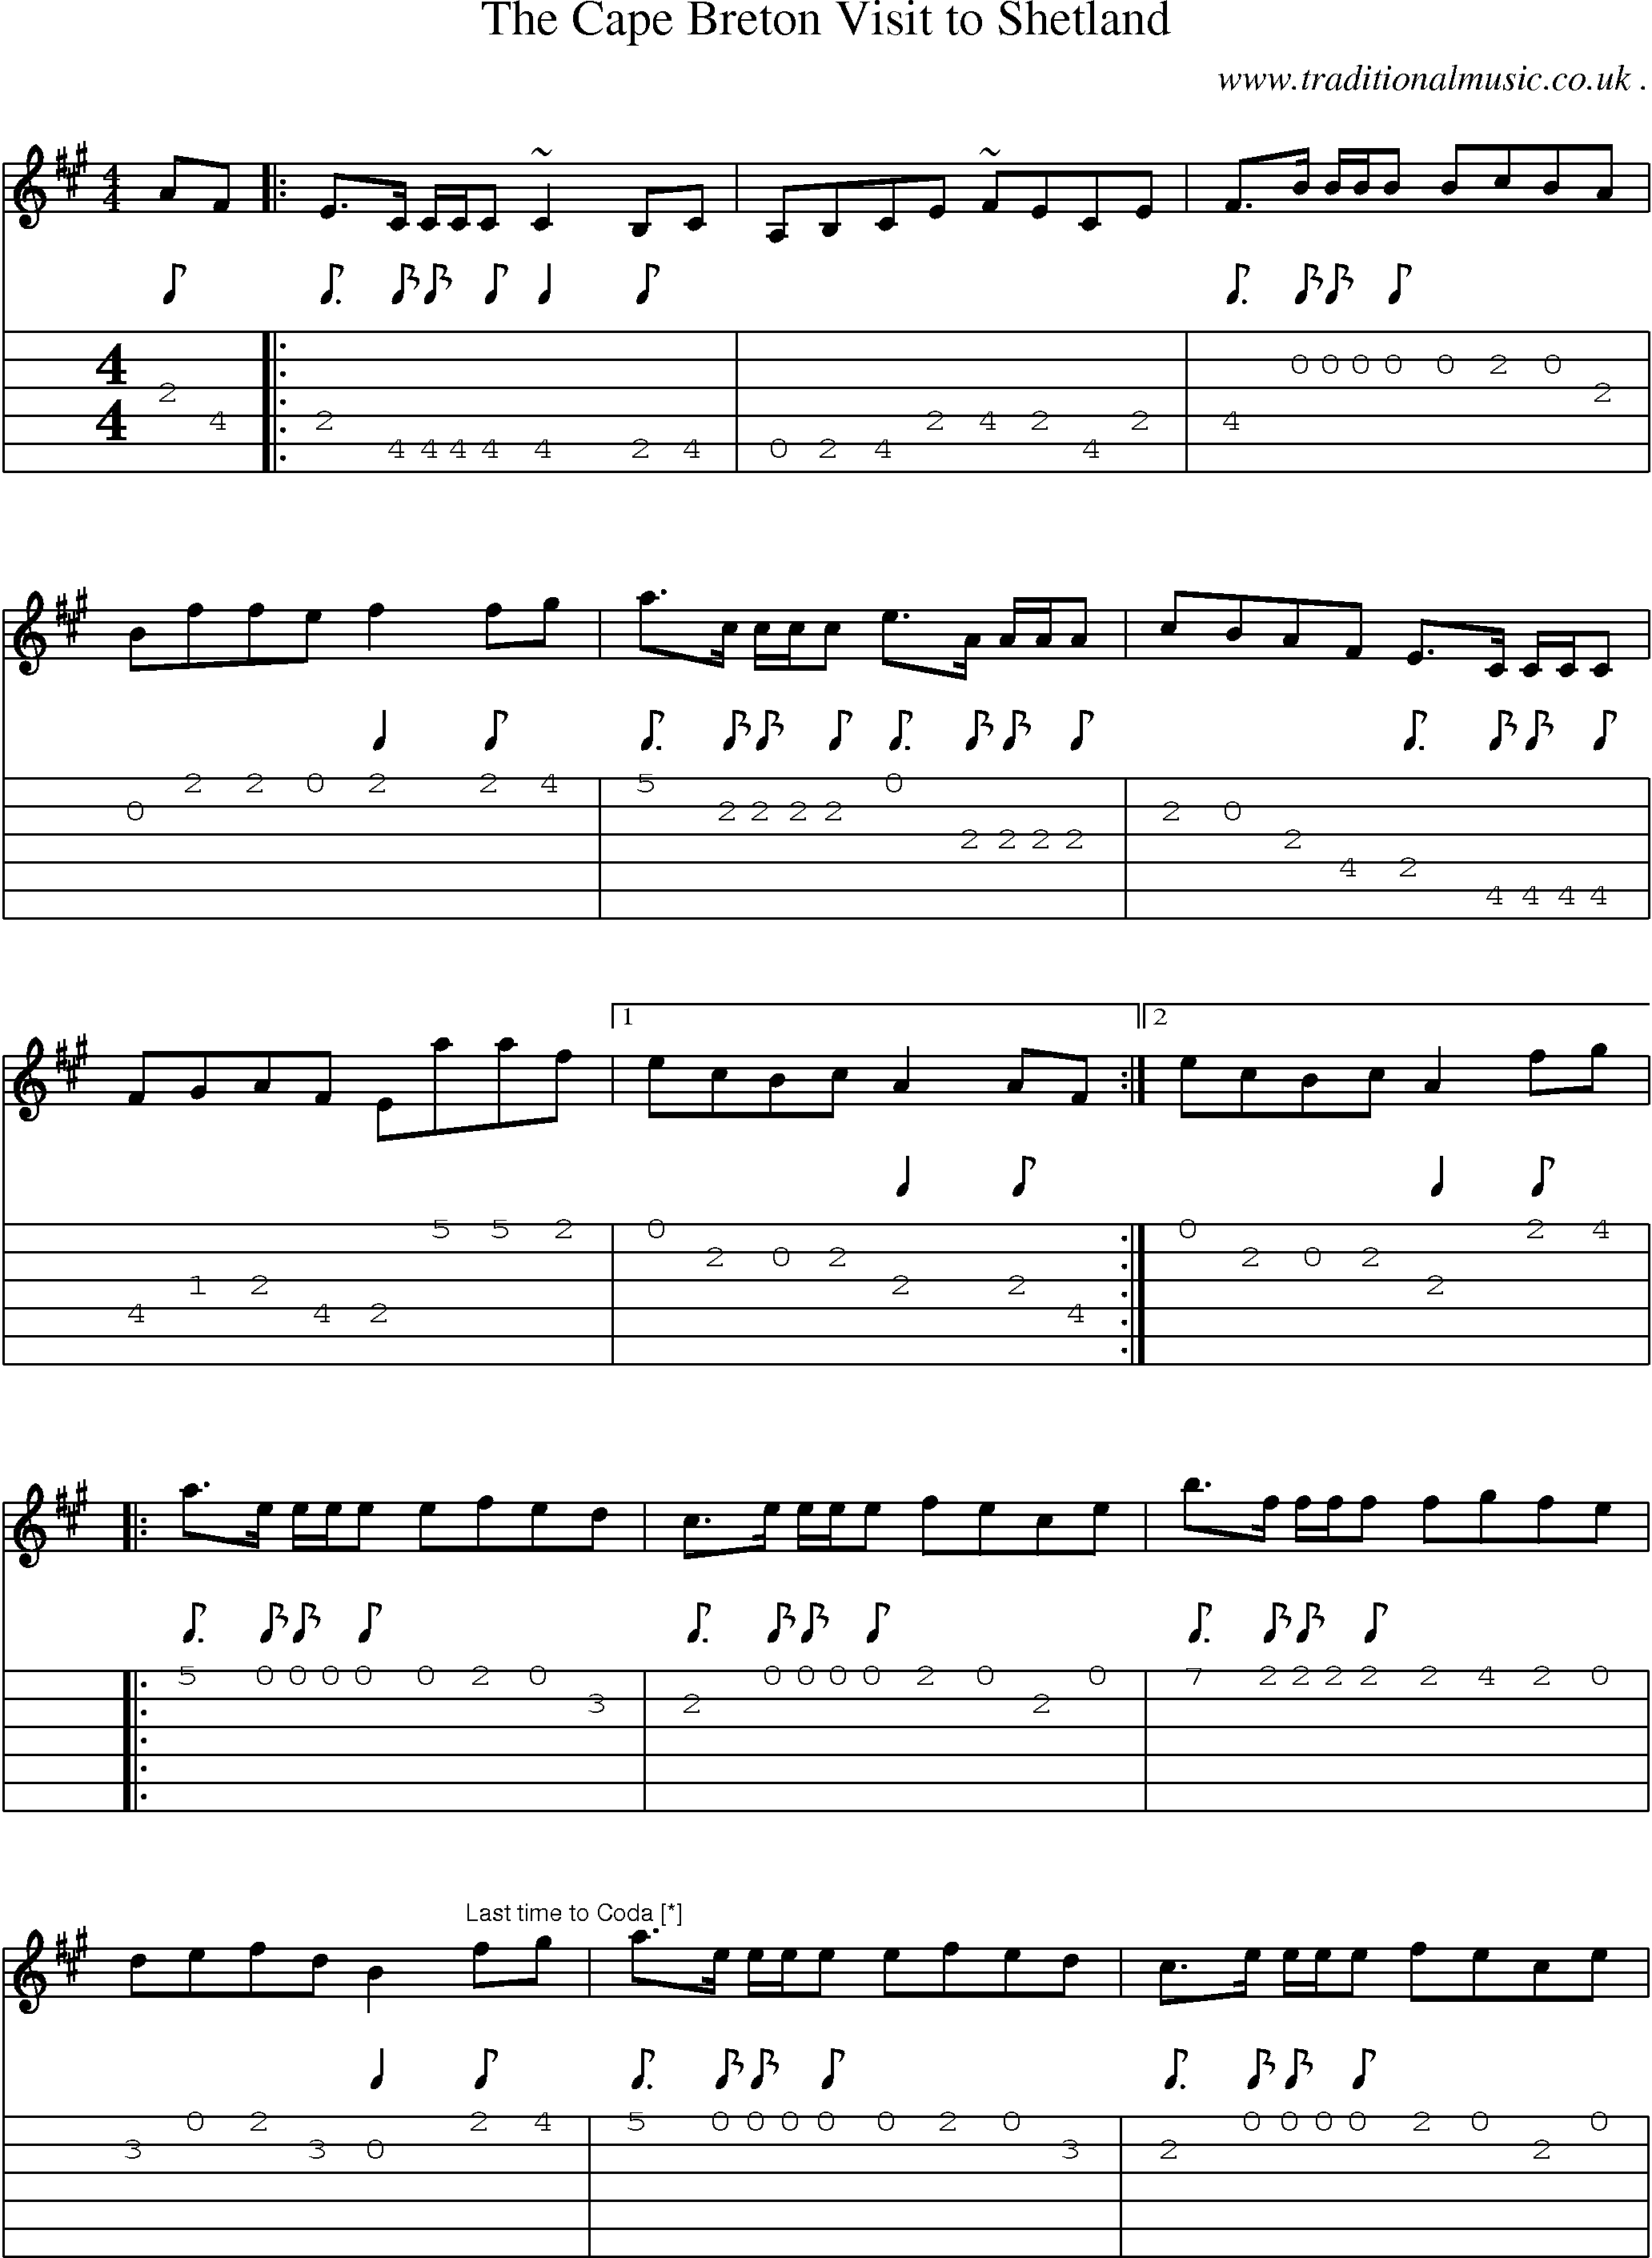 Sheet-music  score, Chords and Guitar Tabs for The Cape Breton Visit To Shetland